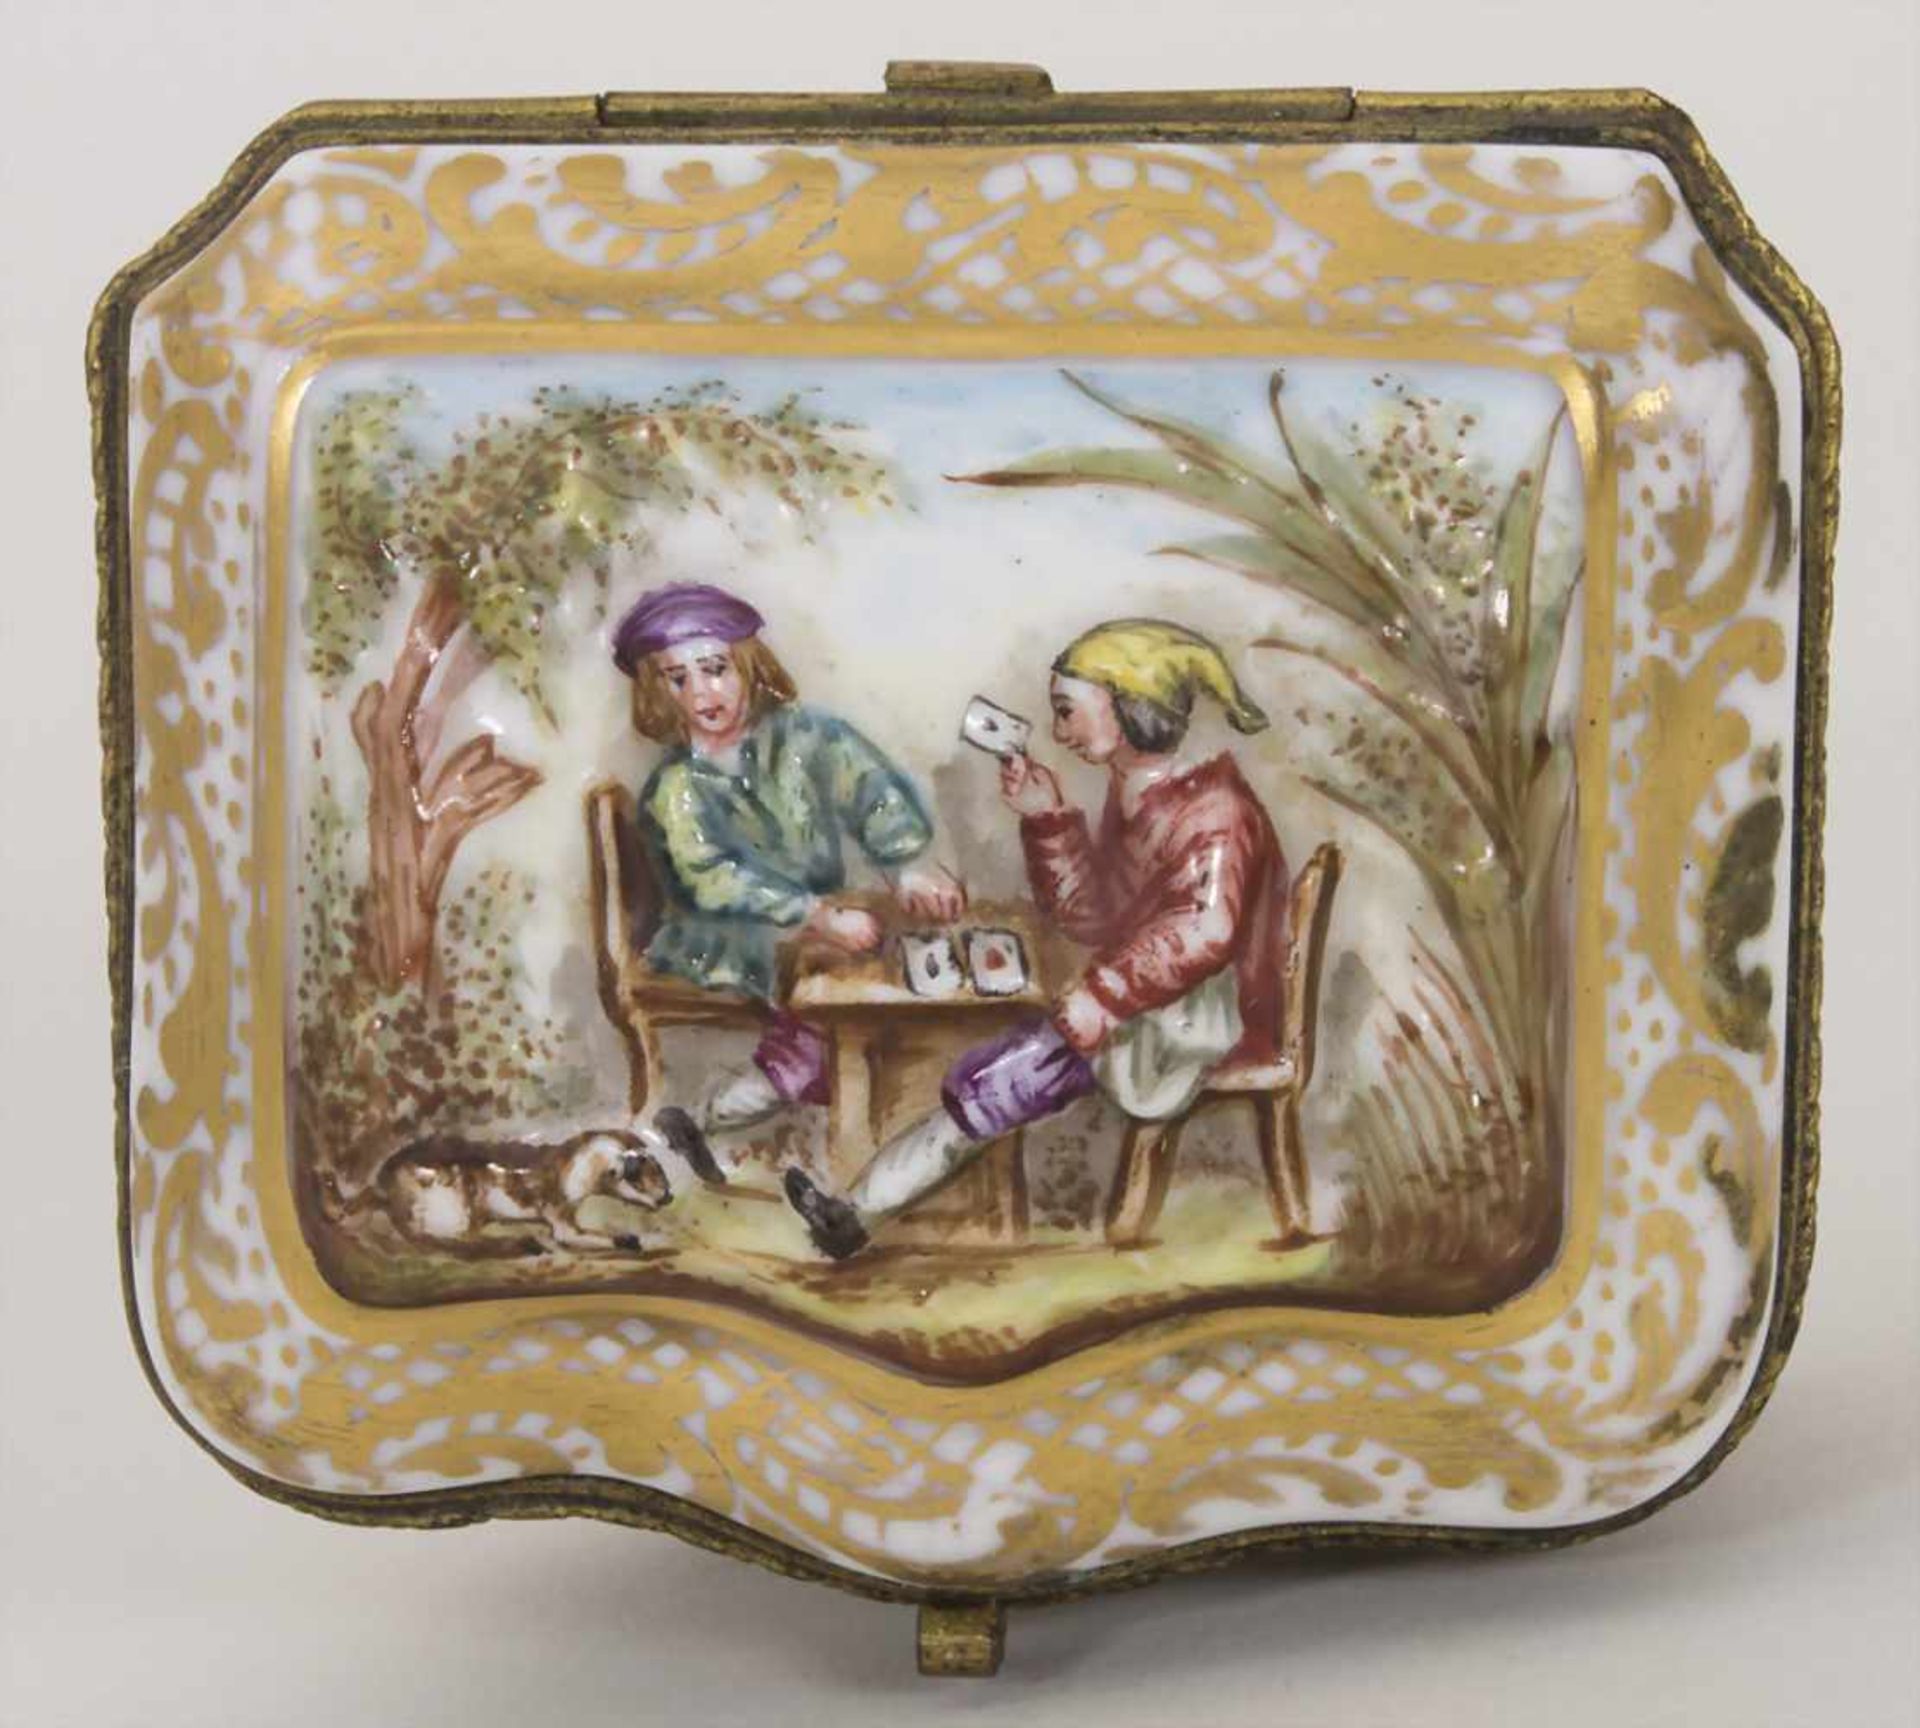 Deckeldose / Tabatiere mit Kartenspielern und Jagdszenen / A snuff box with card players and hunting - Image 5 of 8